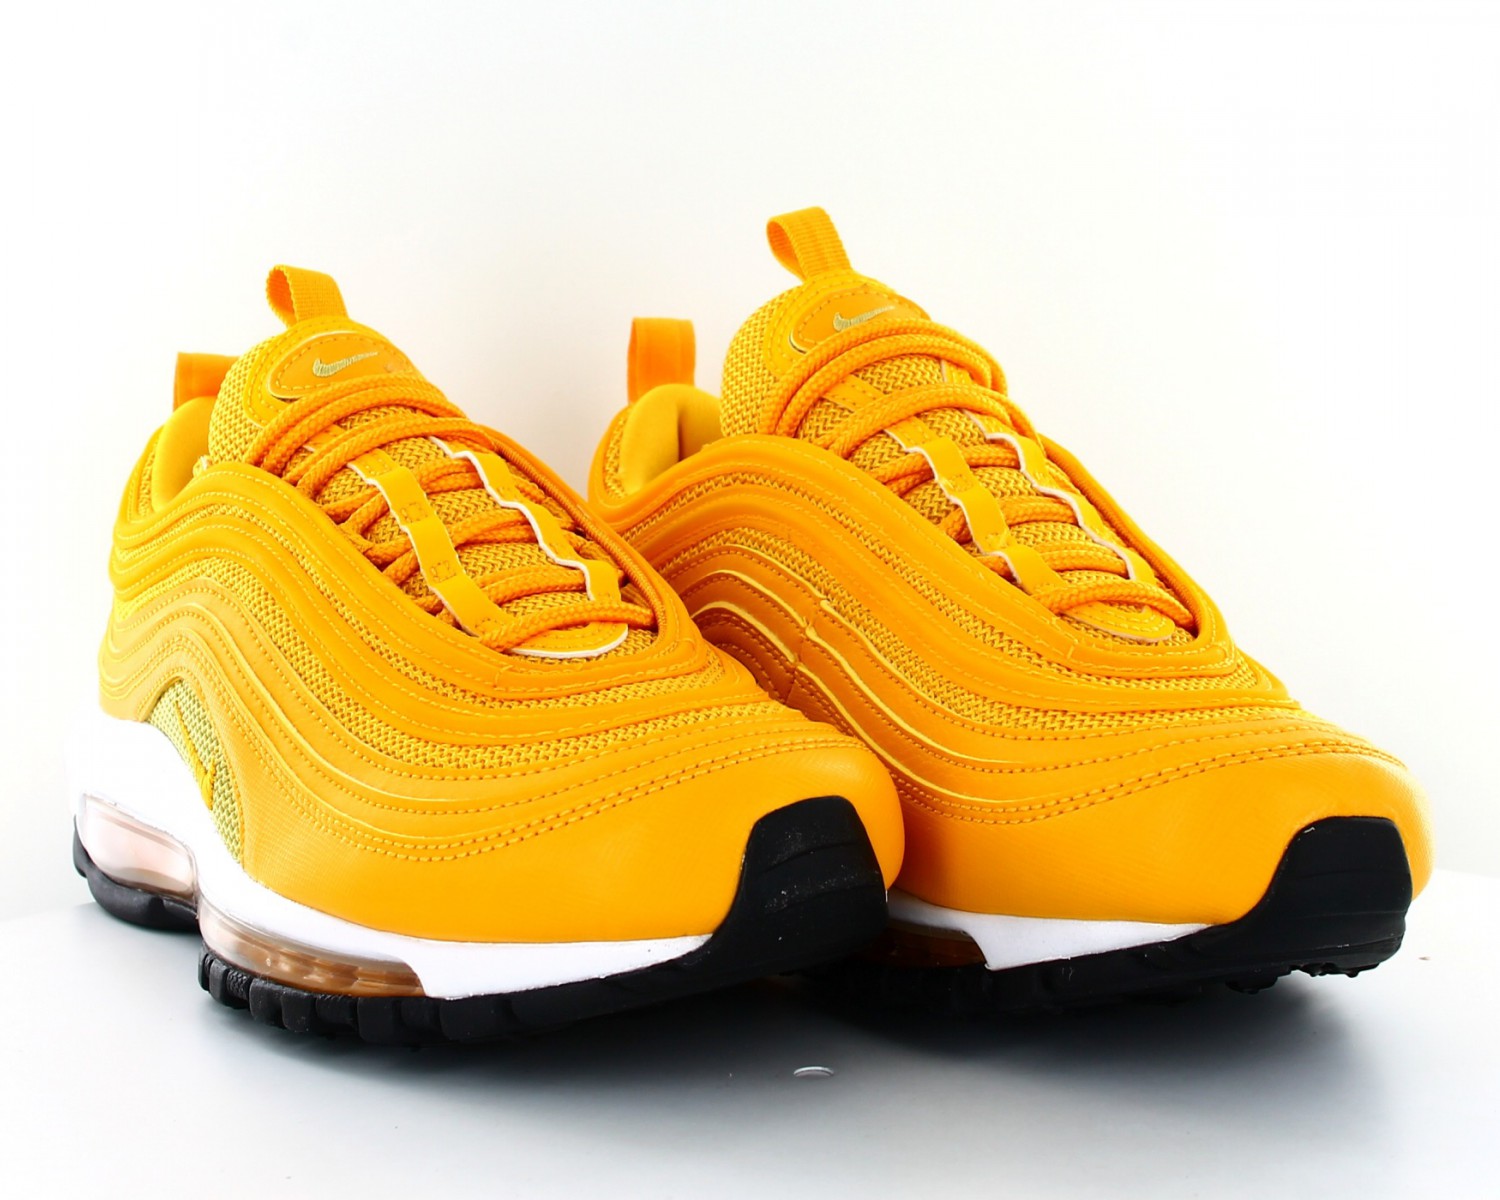 Nike Air Max 97 femme Moutarde-jaune 921733-701